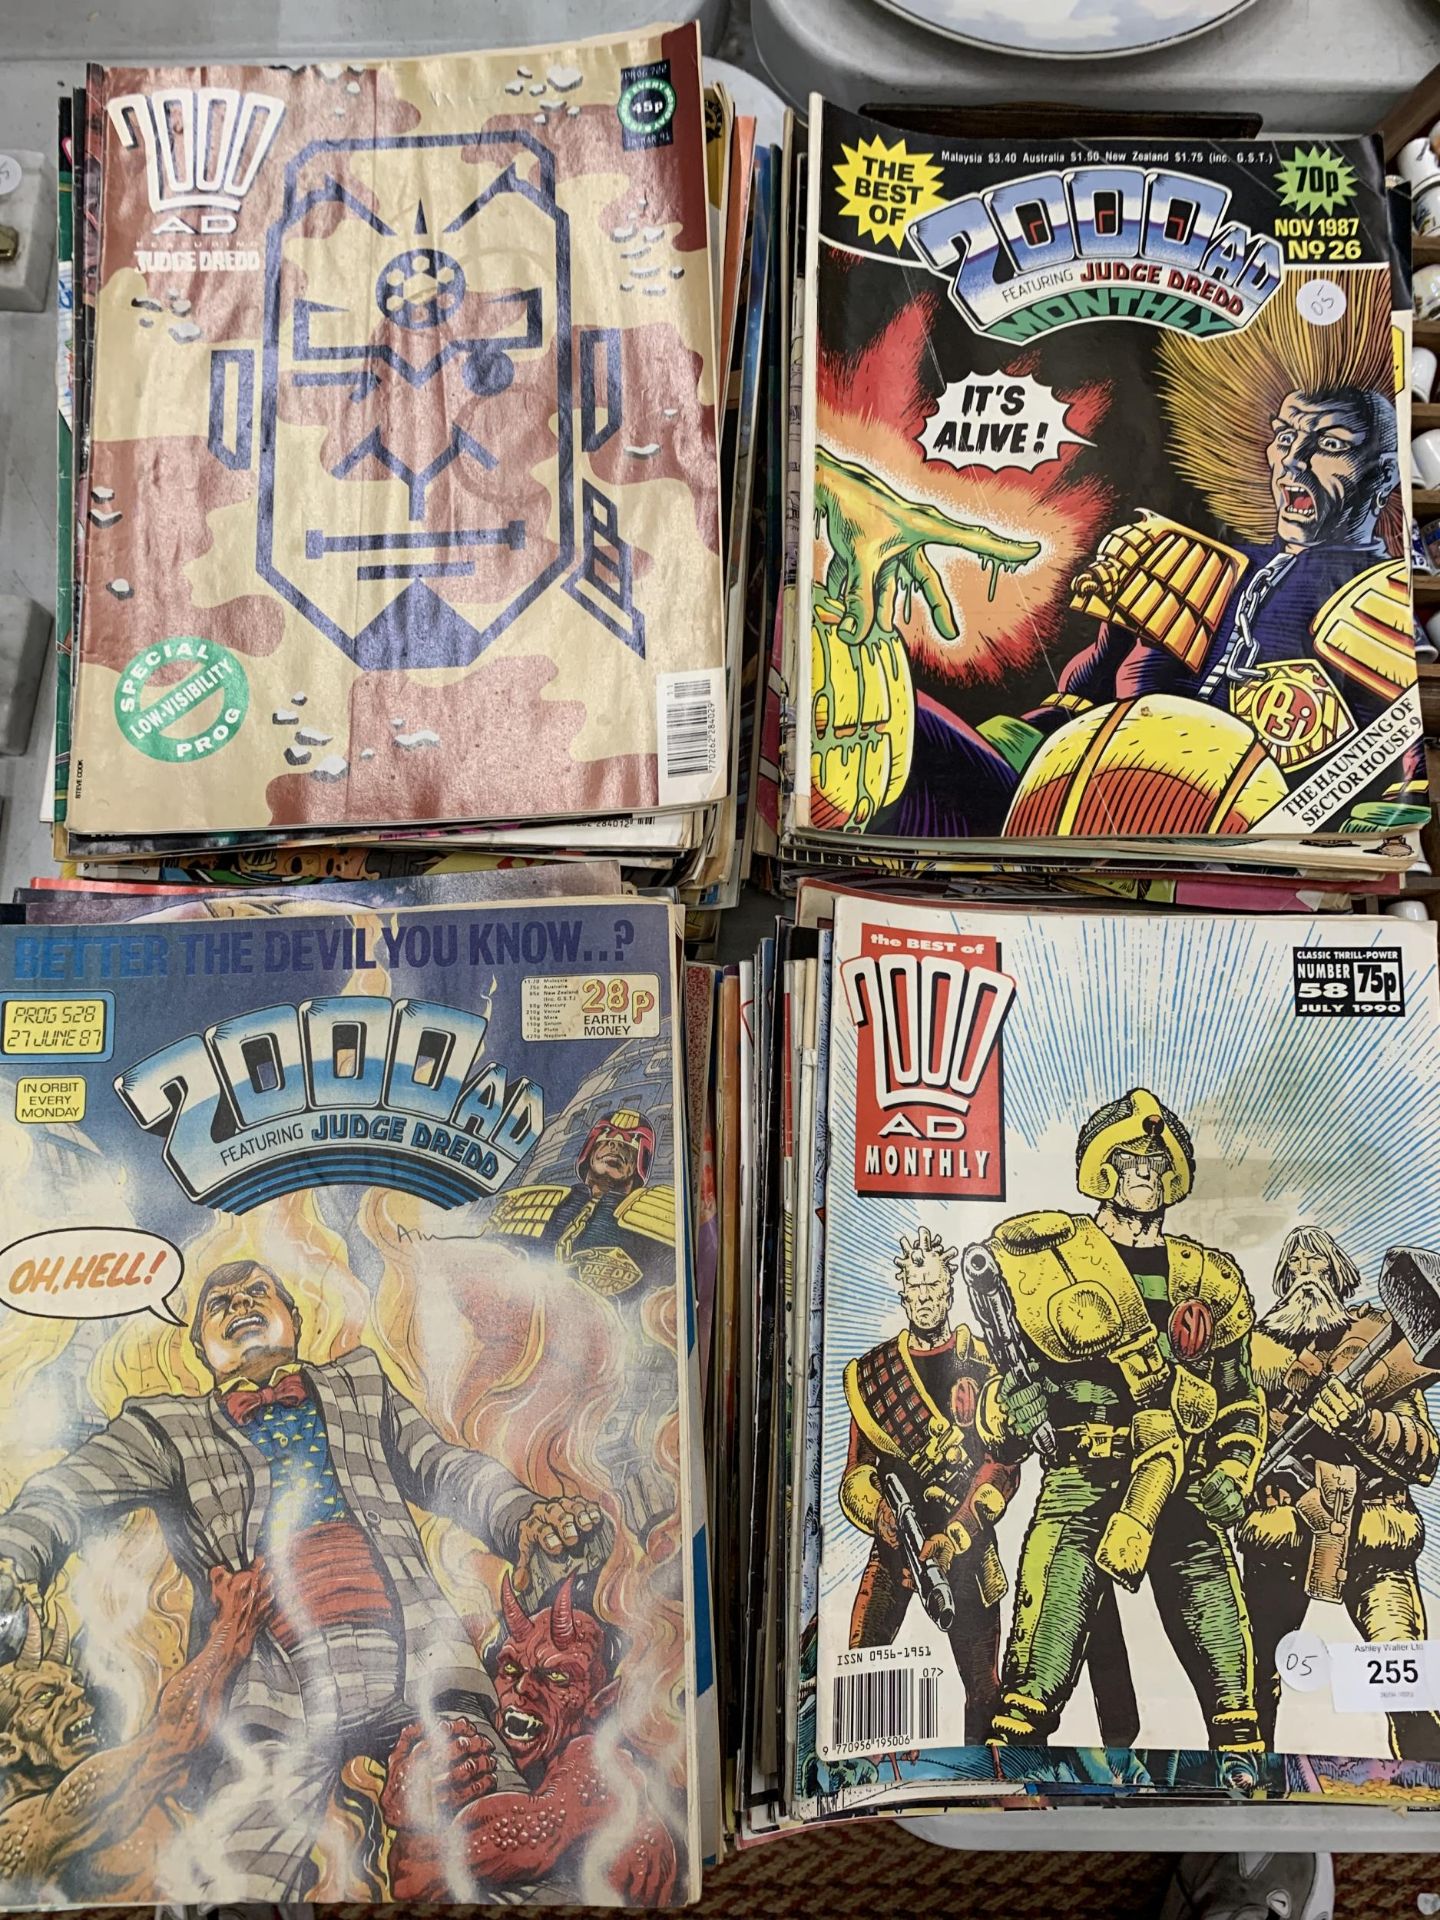 A COLLECTION OF VINTAGE 2000 AD COMICS - Image 4 of 4